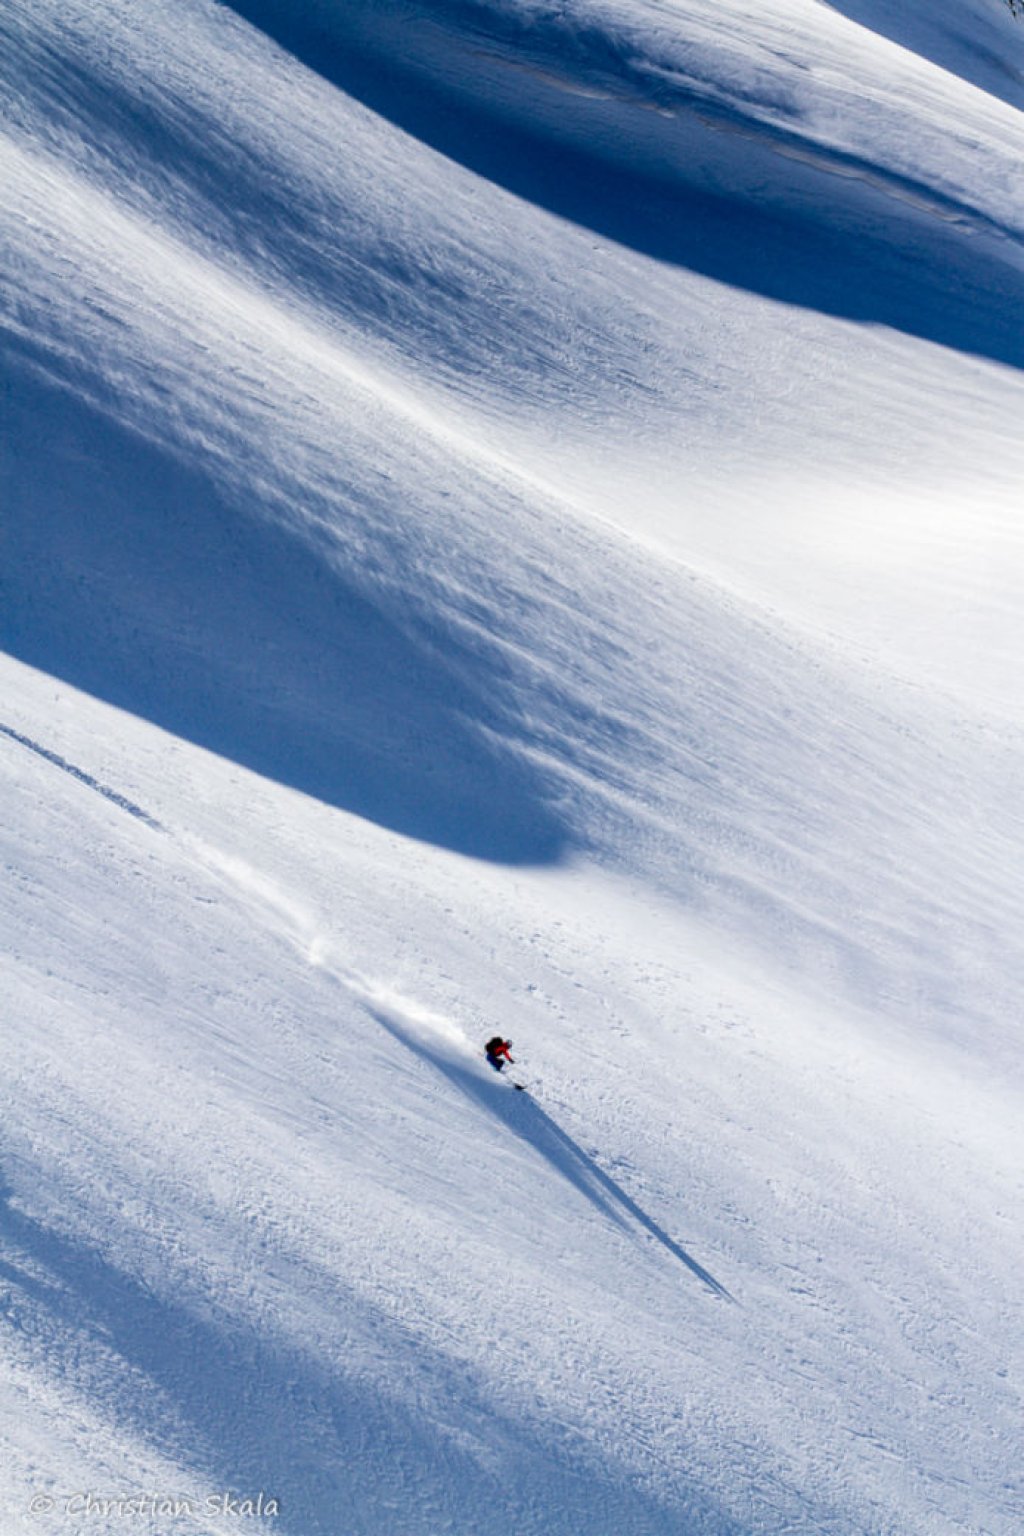 2nd place in the PowderGuide photo competition 2015/2016